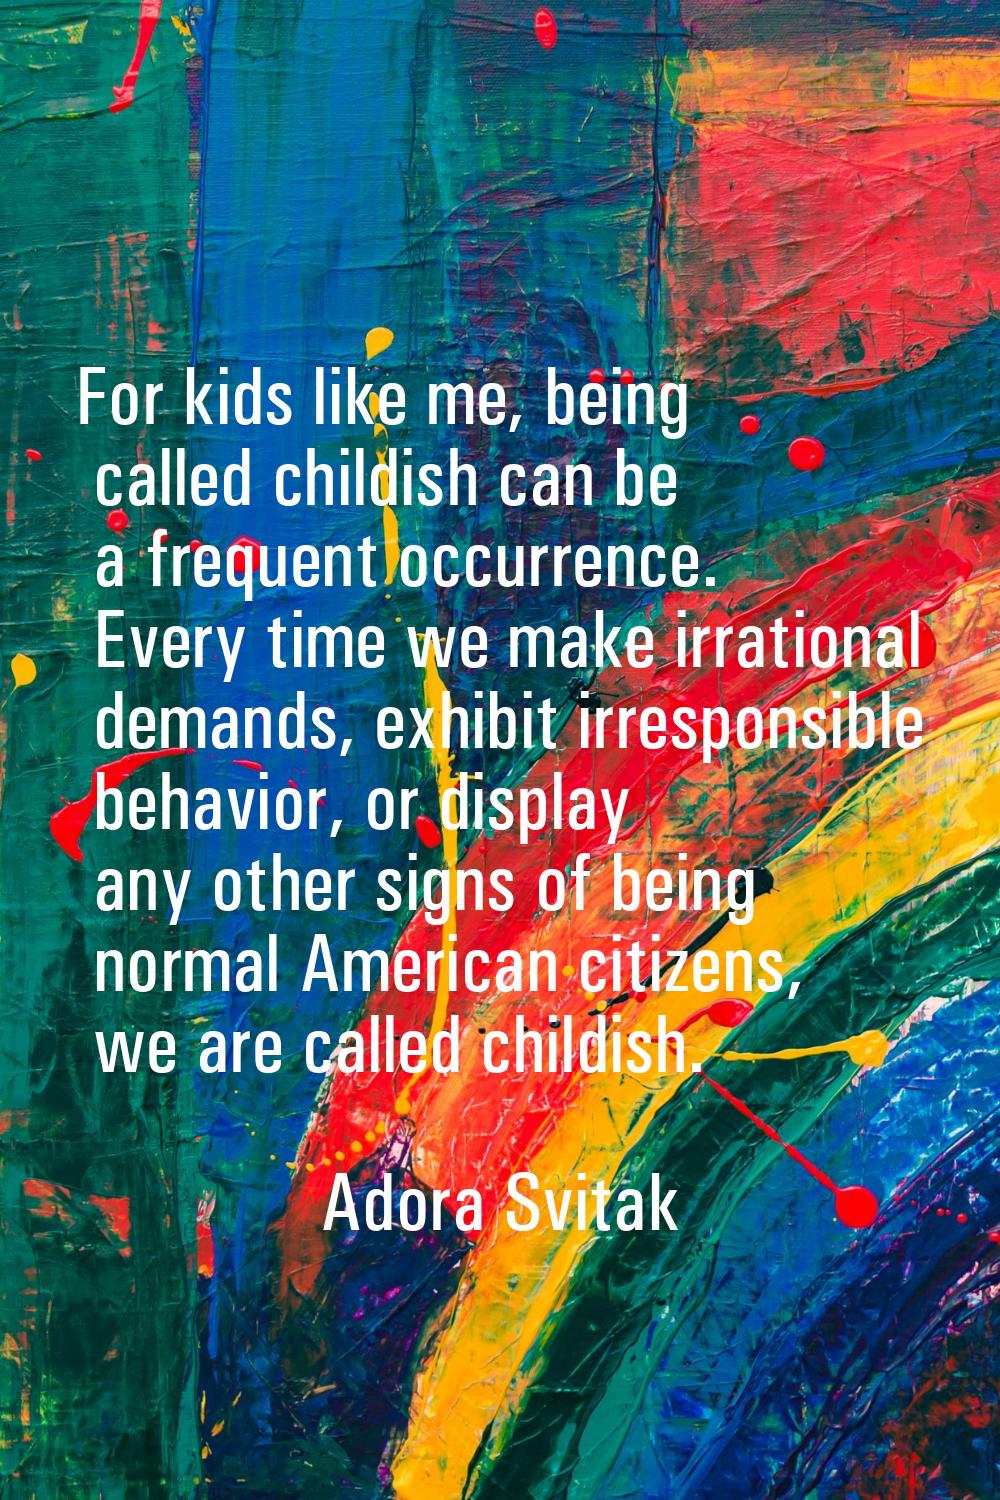 For kids like me, being called childish can be a frequent occurrence. Every time we make irrational